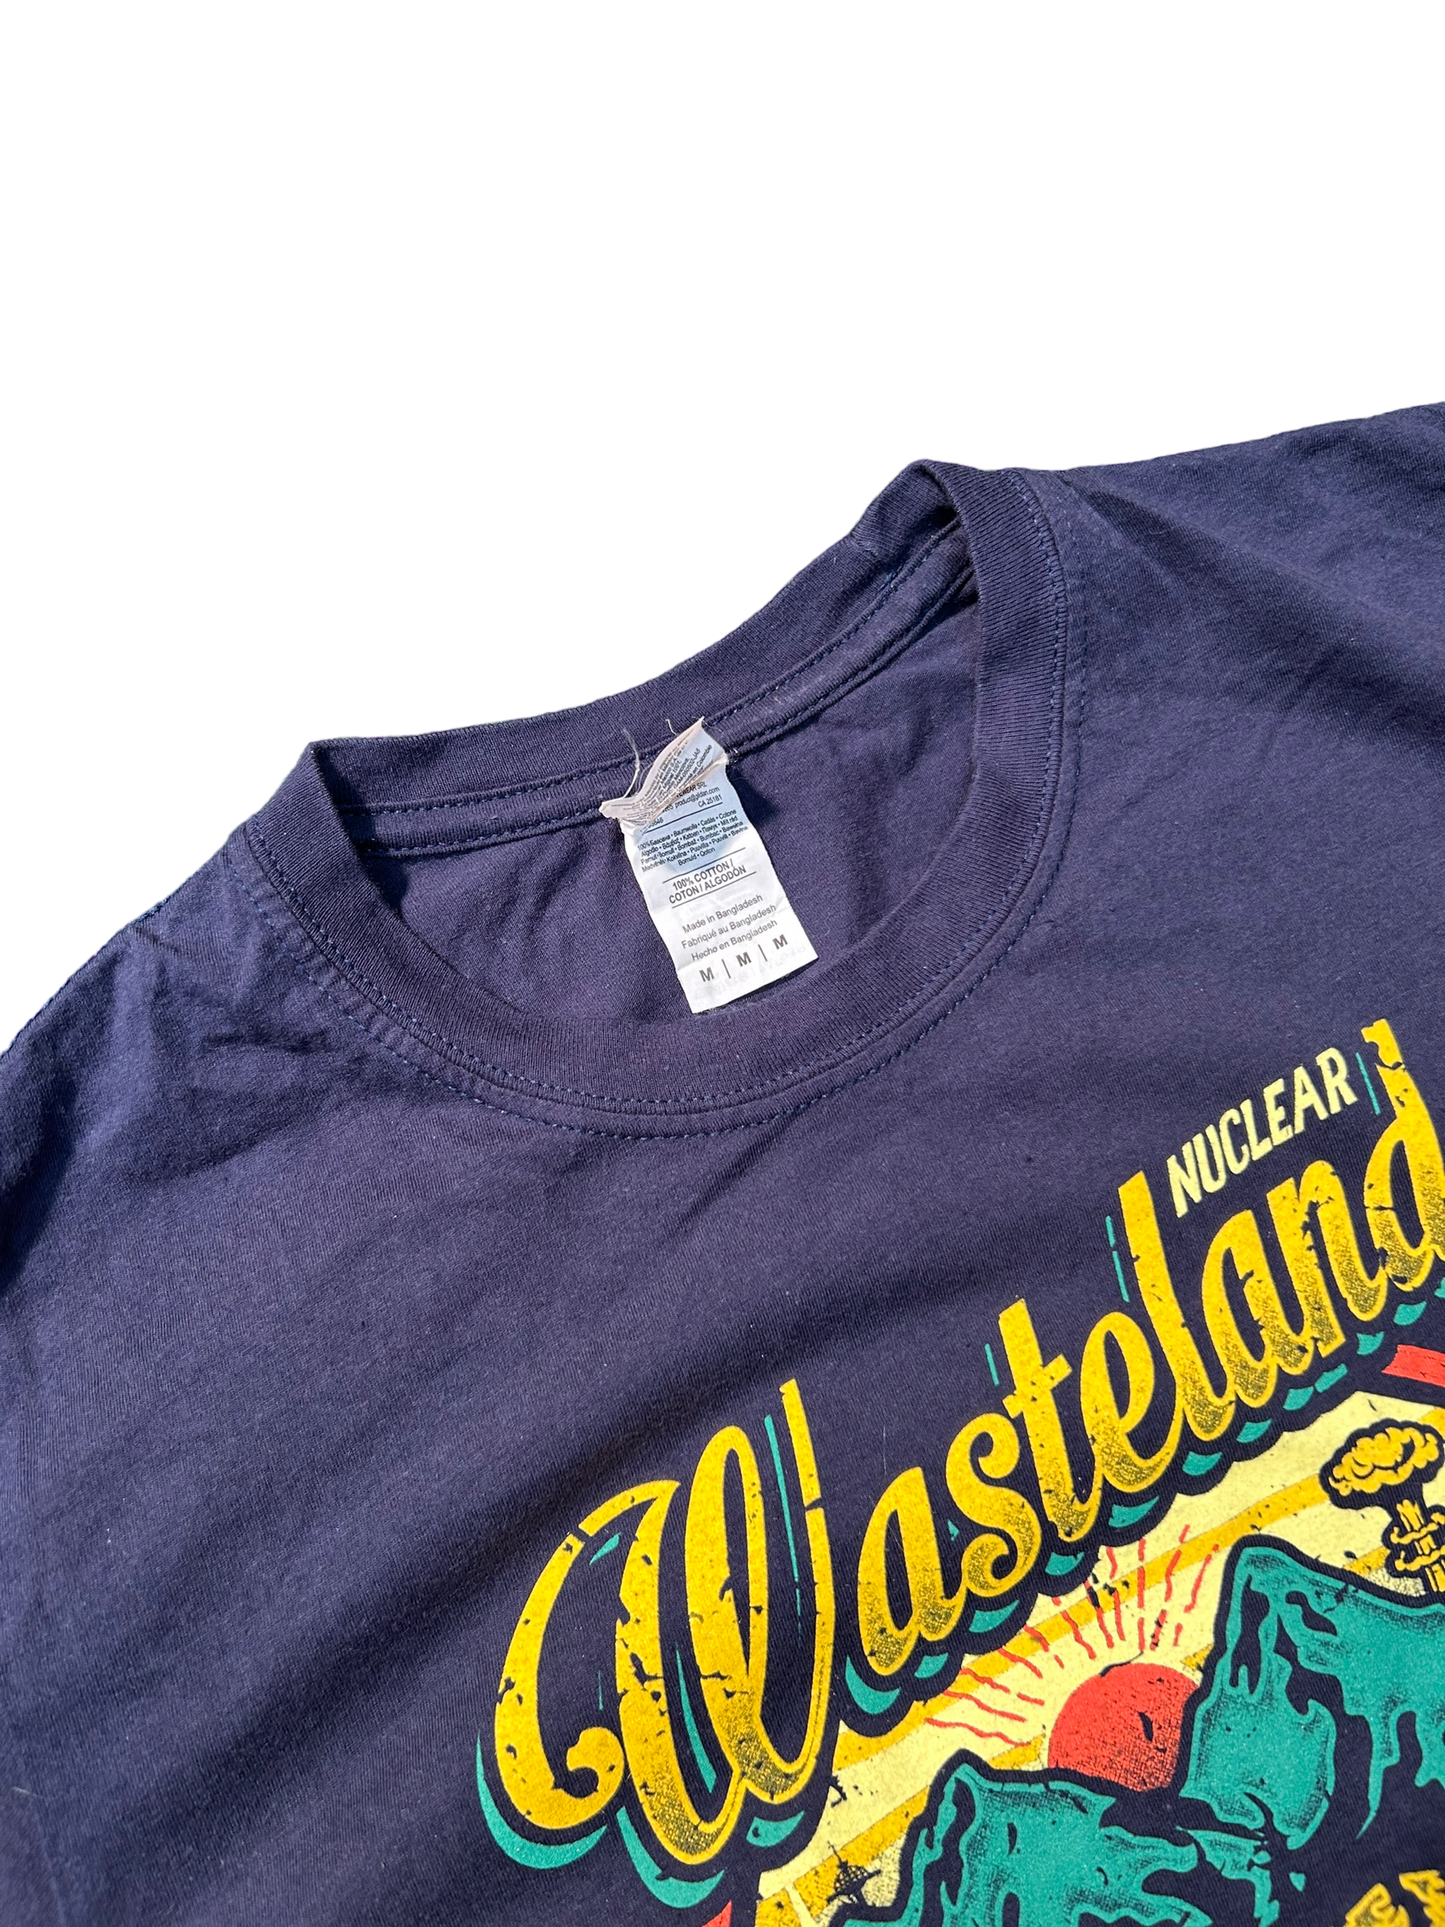 Nuclear Wasteland Graphic Tee